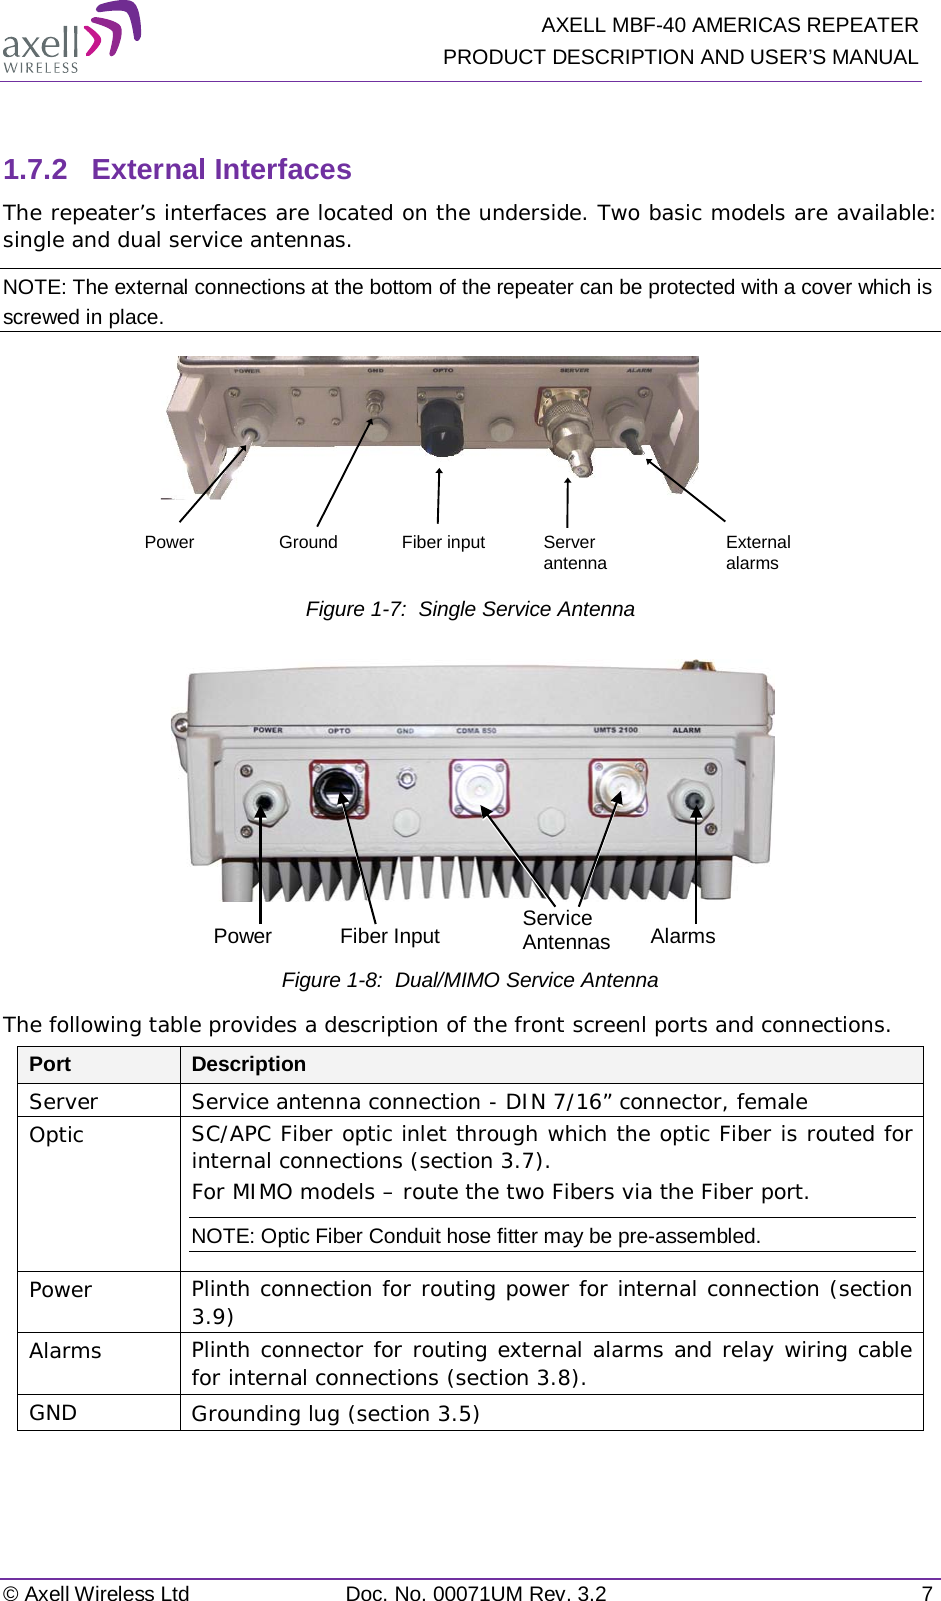   AXELL MBF-40 AMERICAS REPEATER PRODUCT DESCRIPTION AND USER’S MANUAL © Axell Wireless Ltd Doc. No. 00071UM Rev. 3.2  7  1.7.2  External Interfaces The repeater’s interfaces are located on the underside. Two basic models are available: single and dual service antennas. NOTE: The external connections at the bottom of the repeater can be protected with a cover which is screwed in place.  Figure  1-7:  Single Service Antenna    Figure  1-8:  Dual/MIMO Service Antenna The following table provides a description of the front screenl ports and connections. Port Description Server Service antenna connection - DIN 7/16” connector, female Optic SC/APC Fiber optic inlet through which the optic Fiber is routed for internal connections (section  3.7). For MIMO models – route the two Fibers via the Fiber port. NOTE: Optic Fiber Conduit hose fitter may be pre-assembled. Power Plinth connection for routing power for internal connection (section  3.9) Alarms Plinth connector for routing external alarms and relay wiring cable for internal connections (section  3.8). GND Grounding lug (section  3.5)   Power Fiber inputGround Server antenna External alarmsService Antennas Fiber Input Power Alarms 